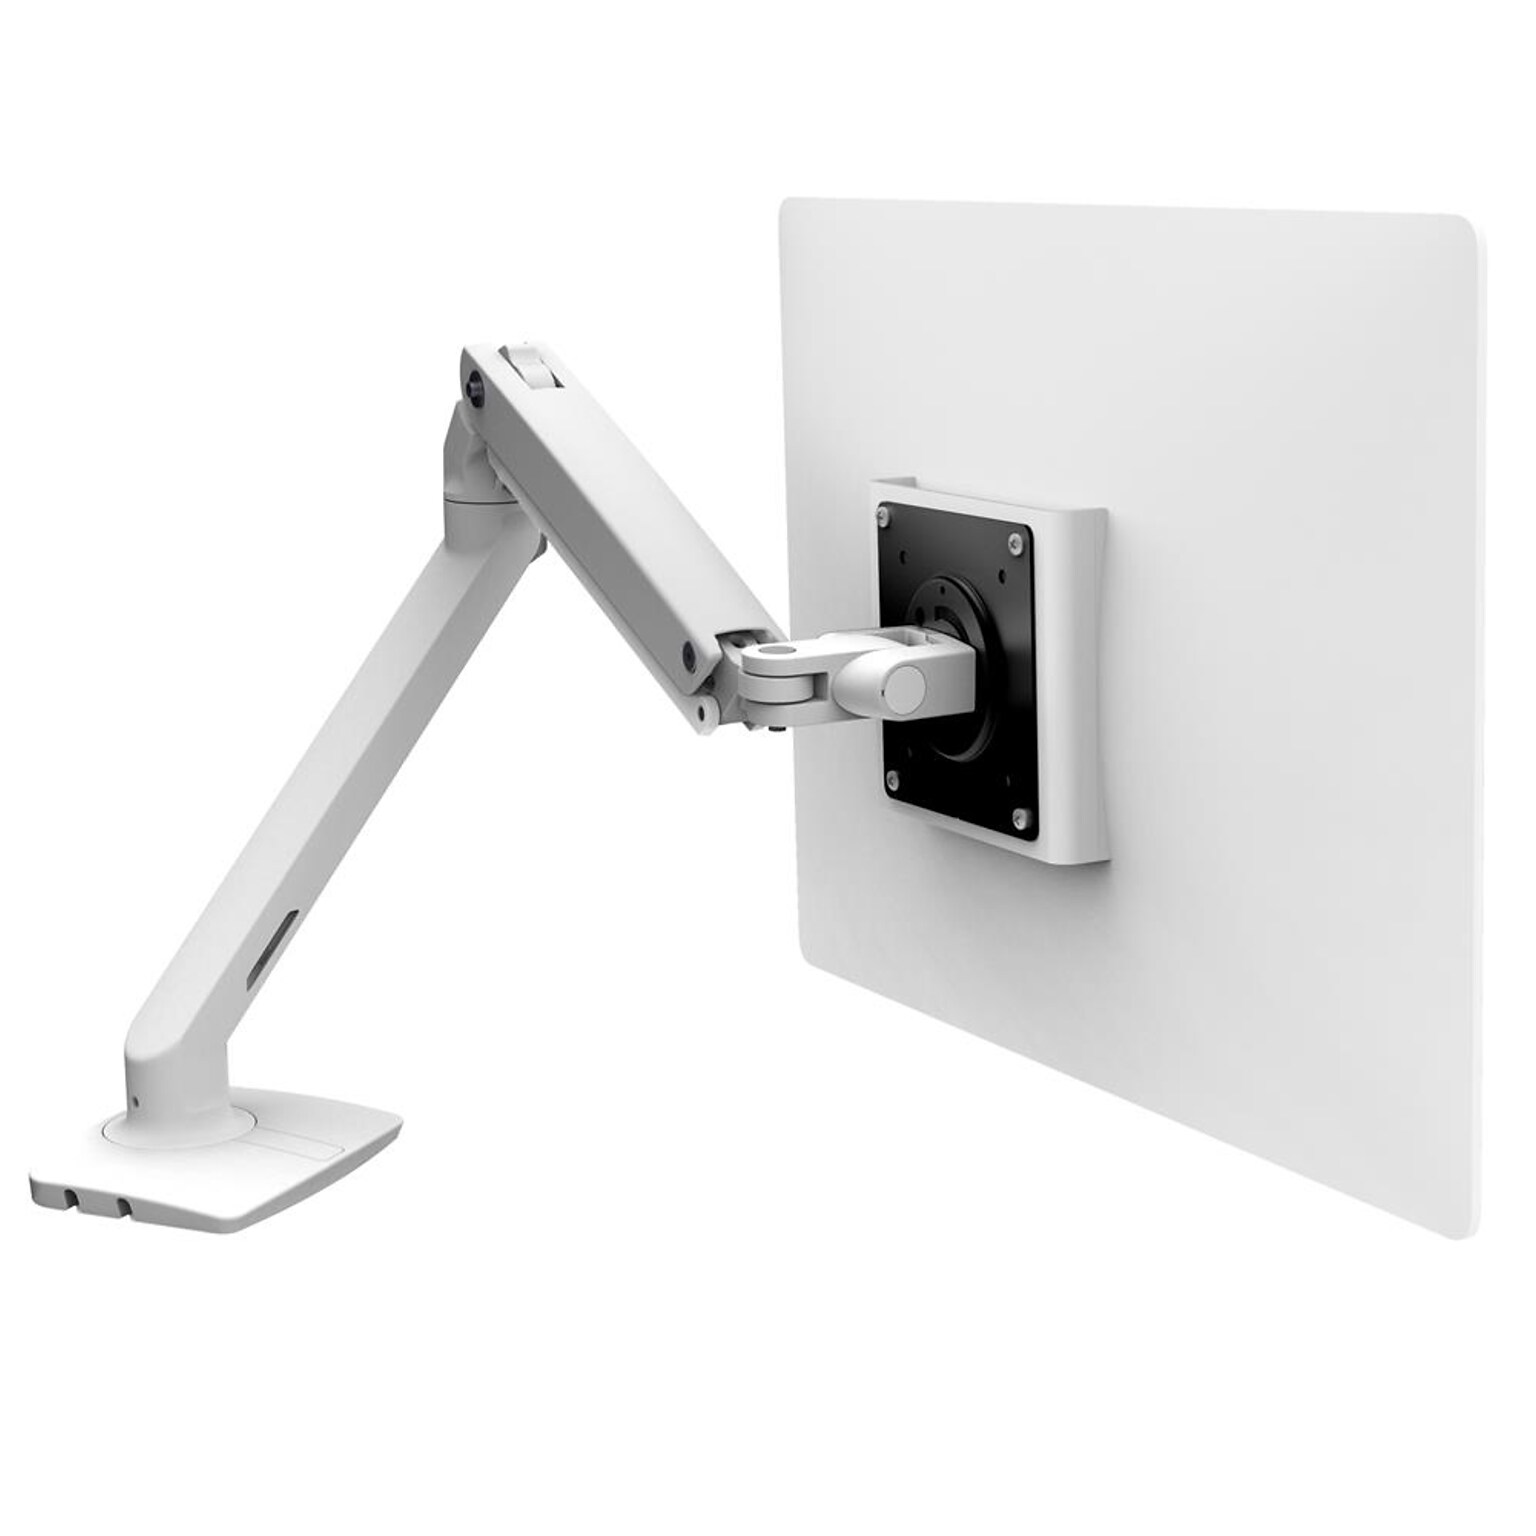 Ergotron MXV Desk Adjustable Single Arm with 2-Piece Clamp, 34 Screen Support, White (45-486-216)